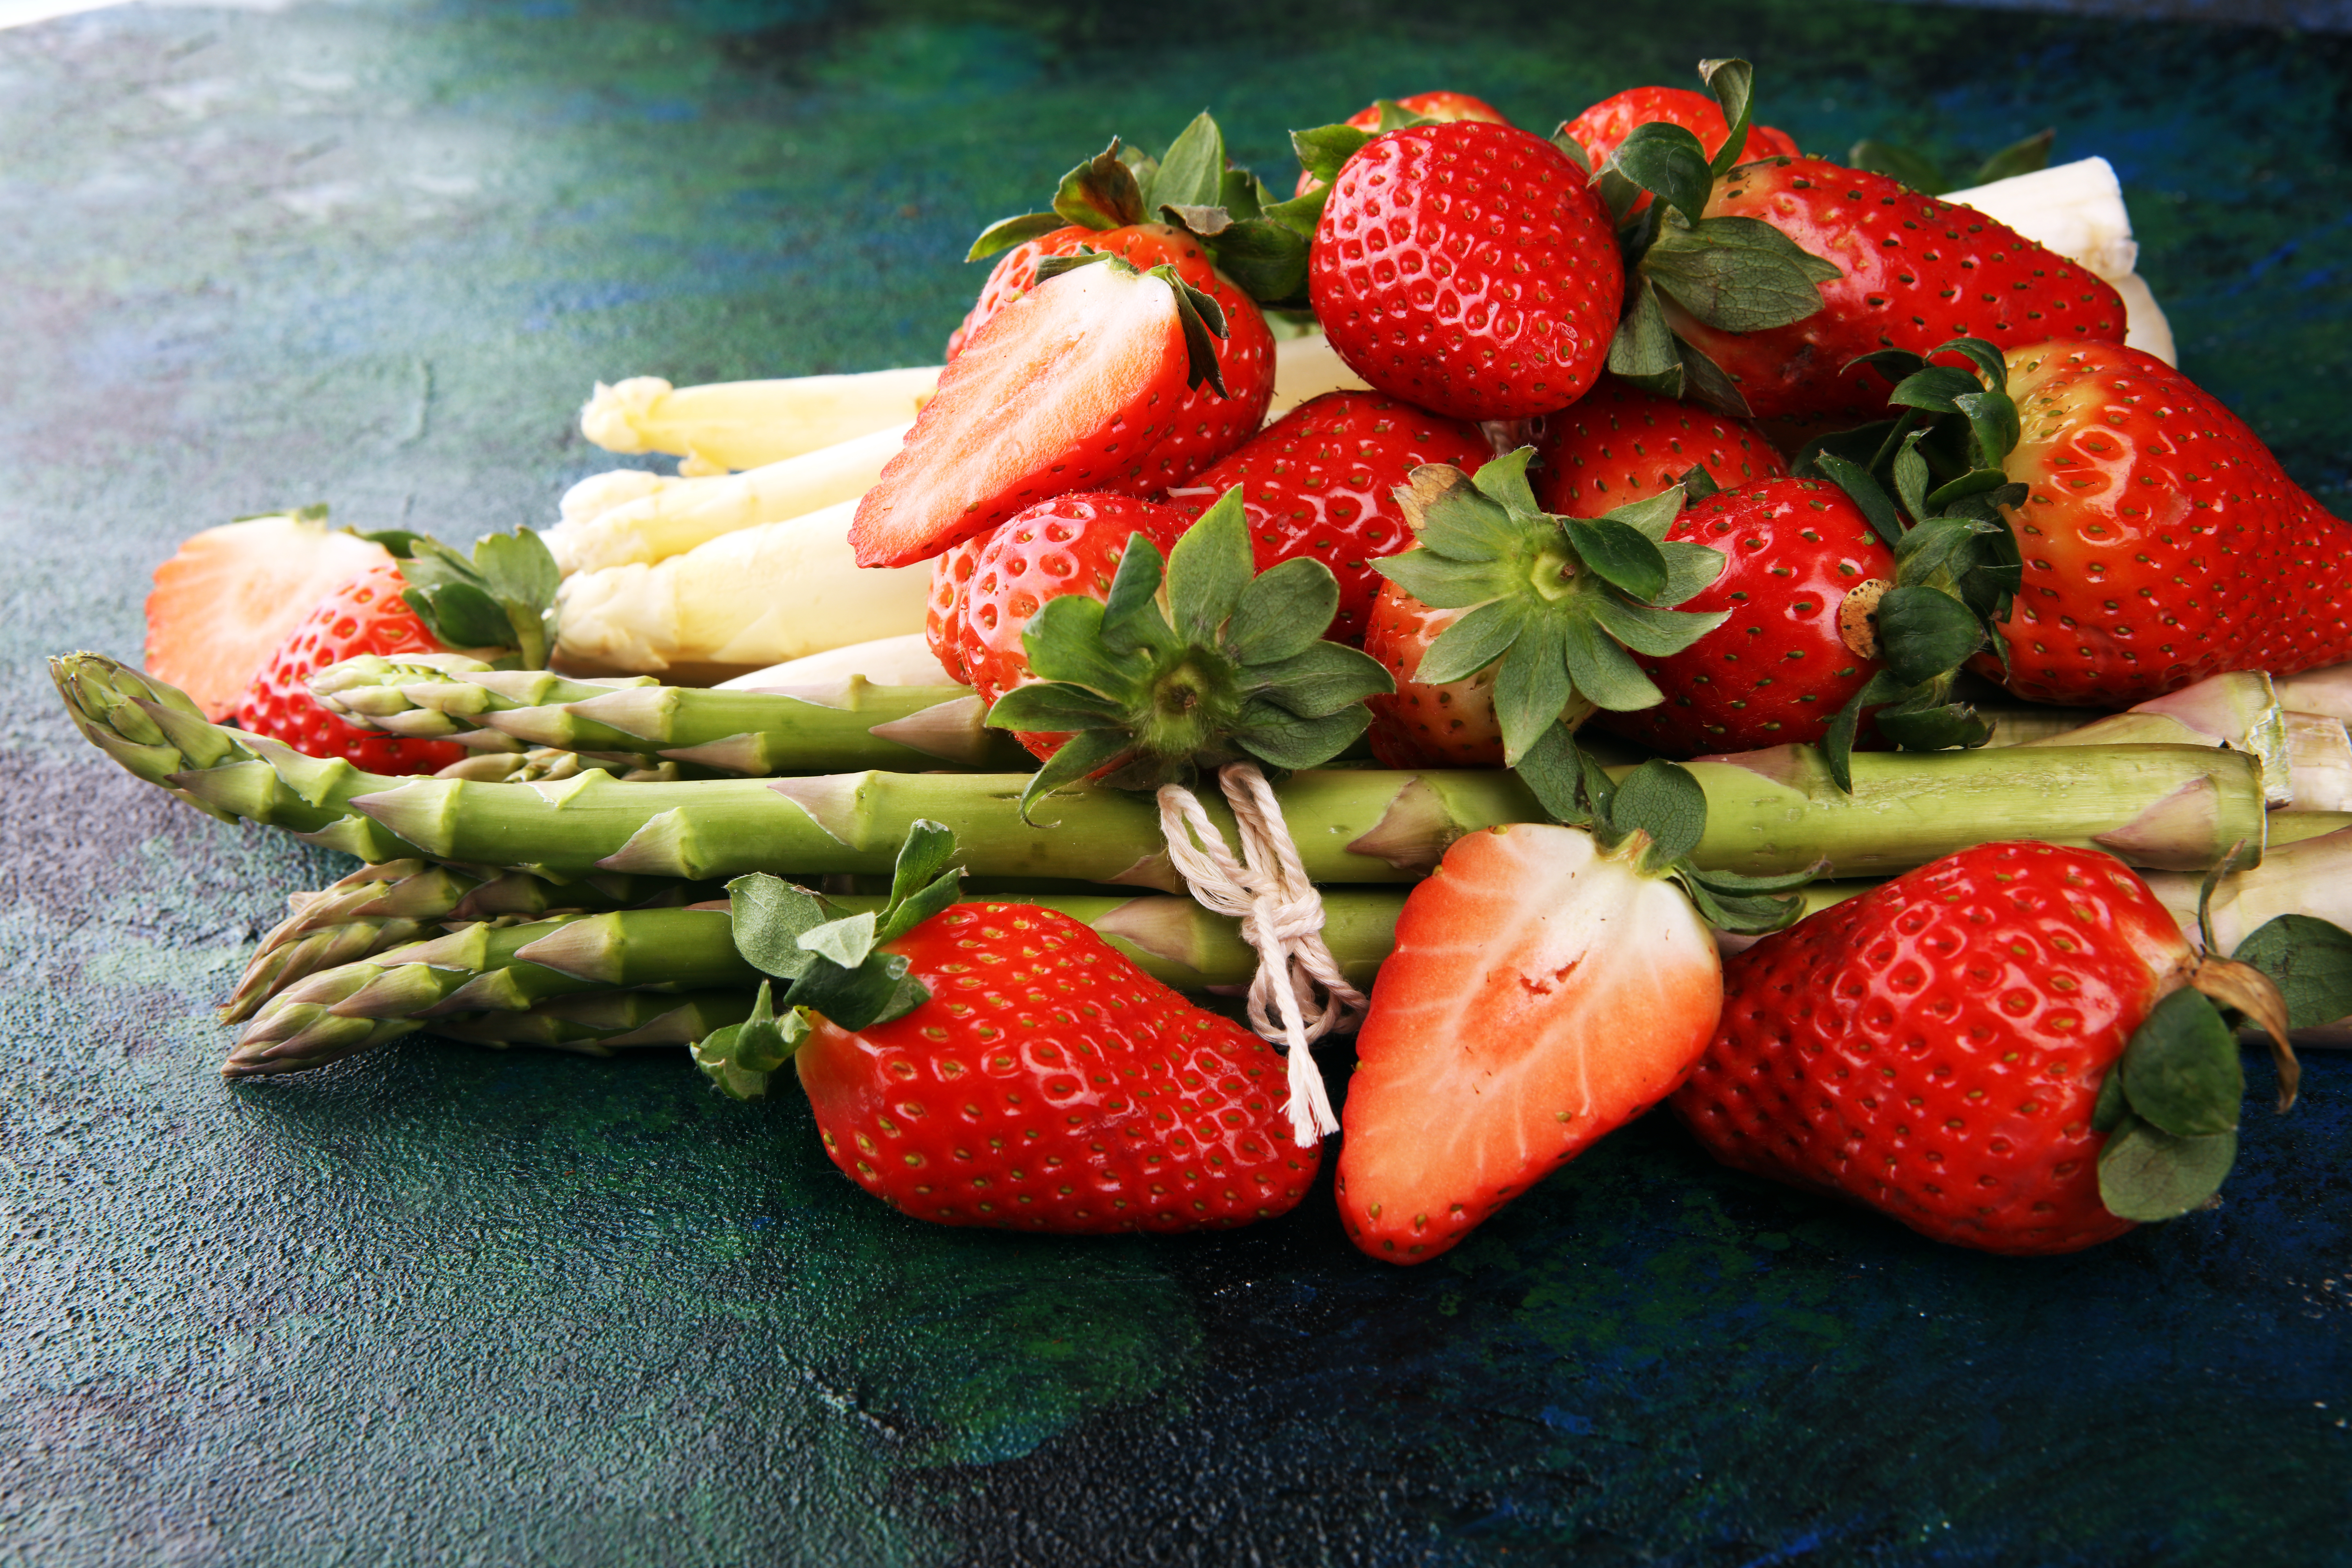 Whole and sliced strawberries laying over asparagus on a black table.